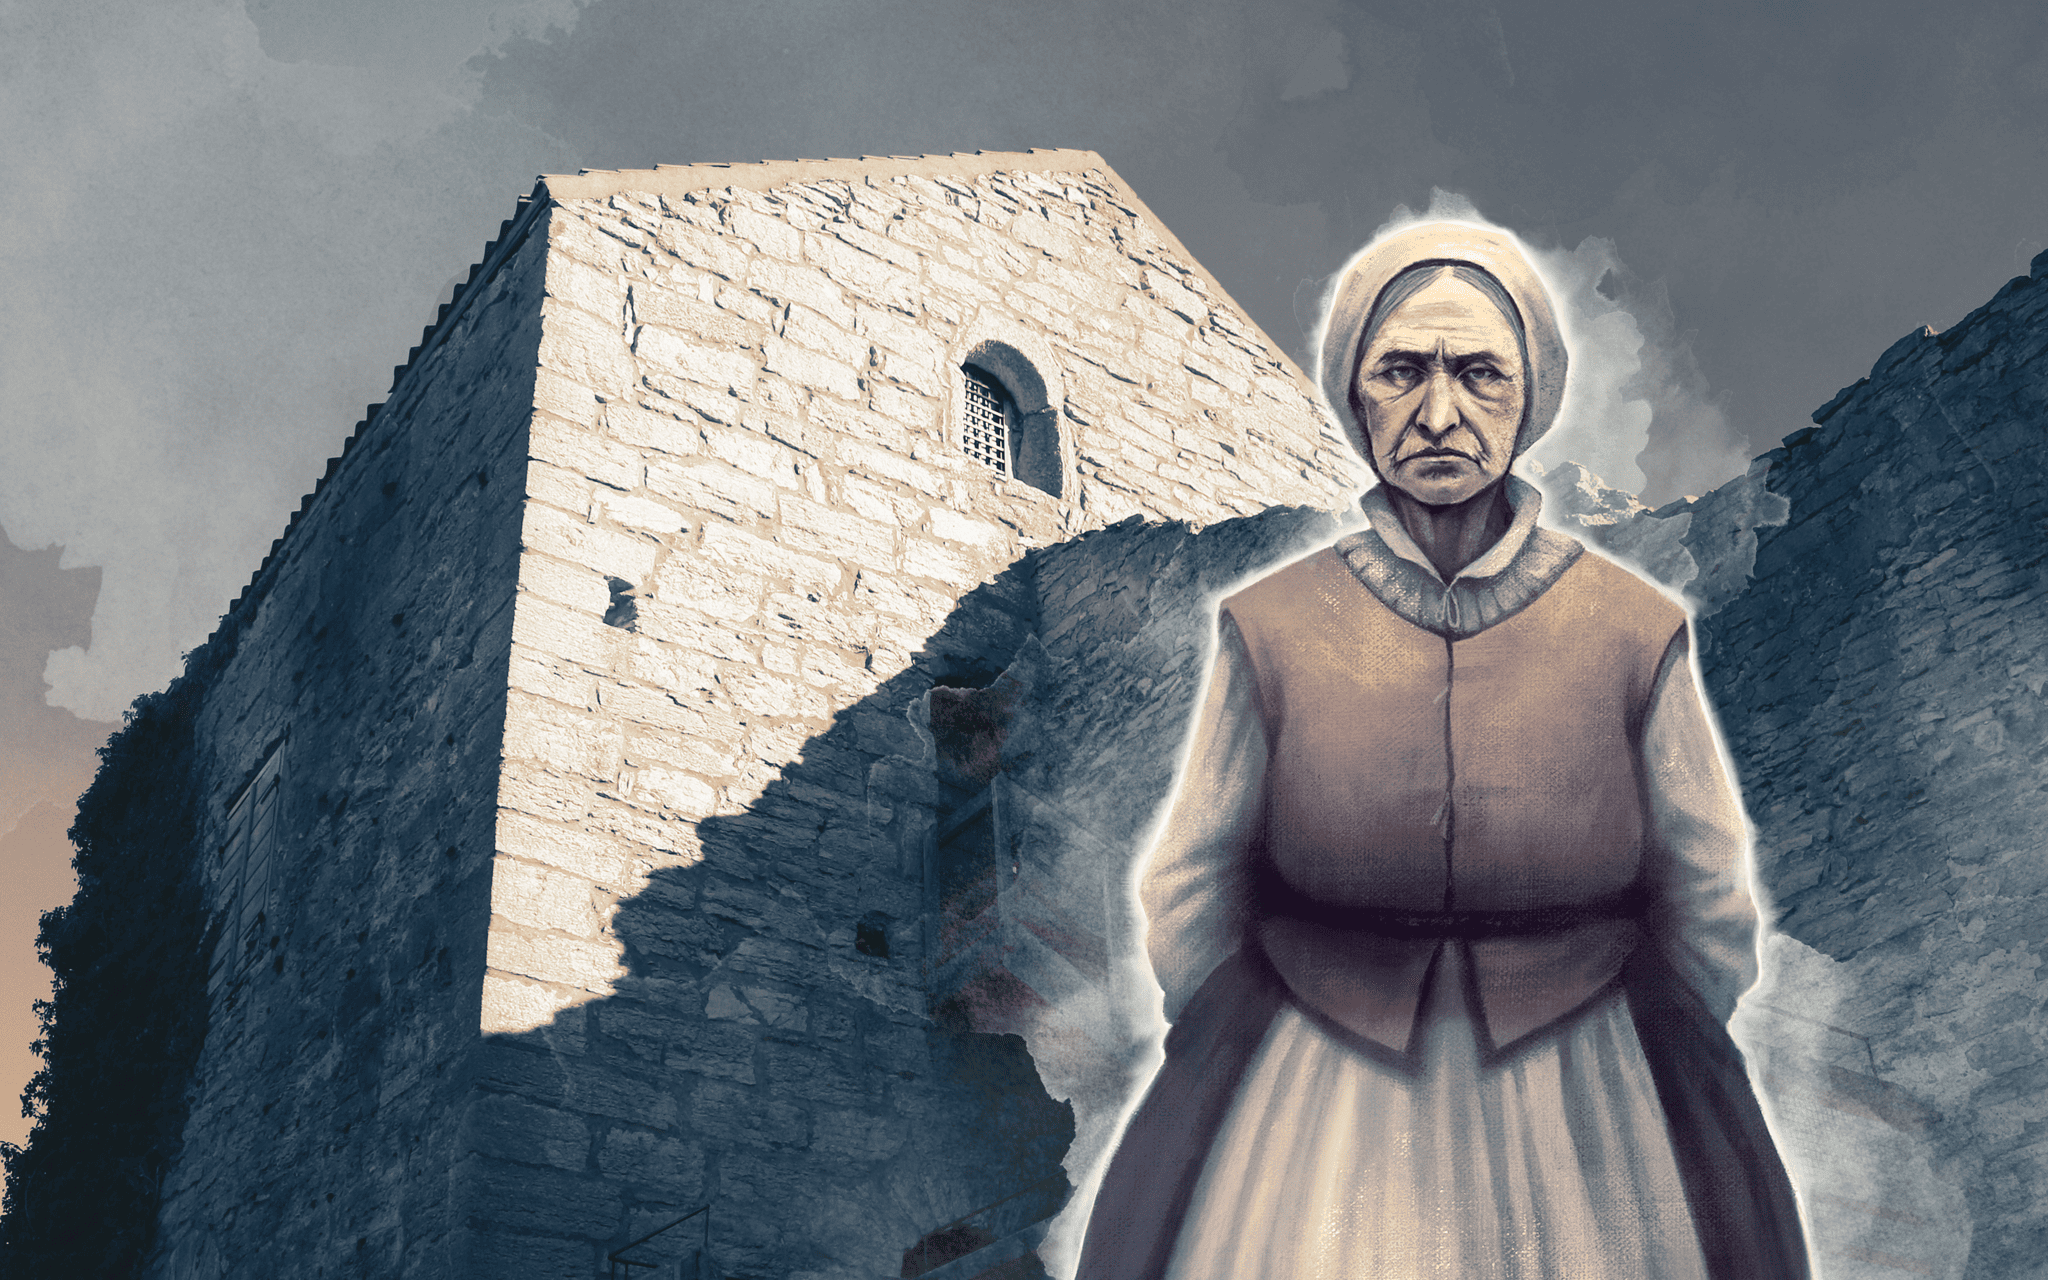 A ghost woman is standing in fron of an old stone building. She has a grim look on her face.